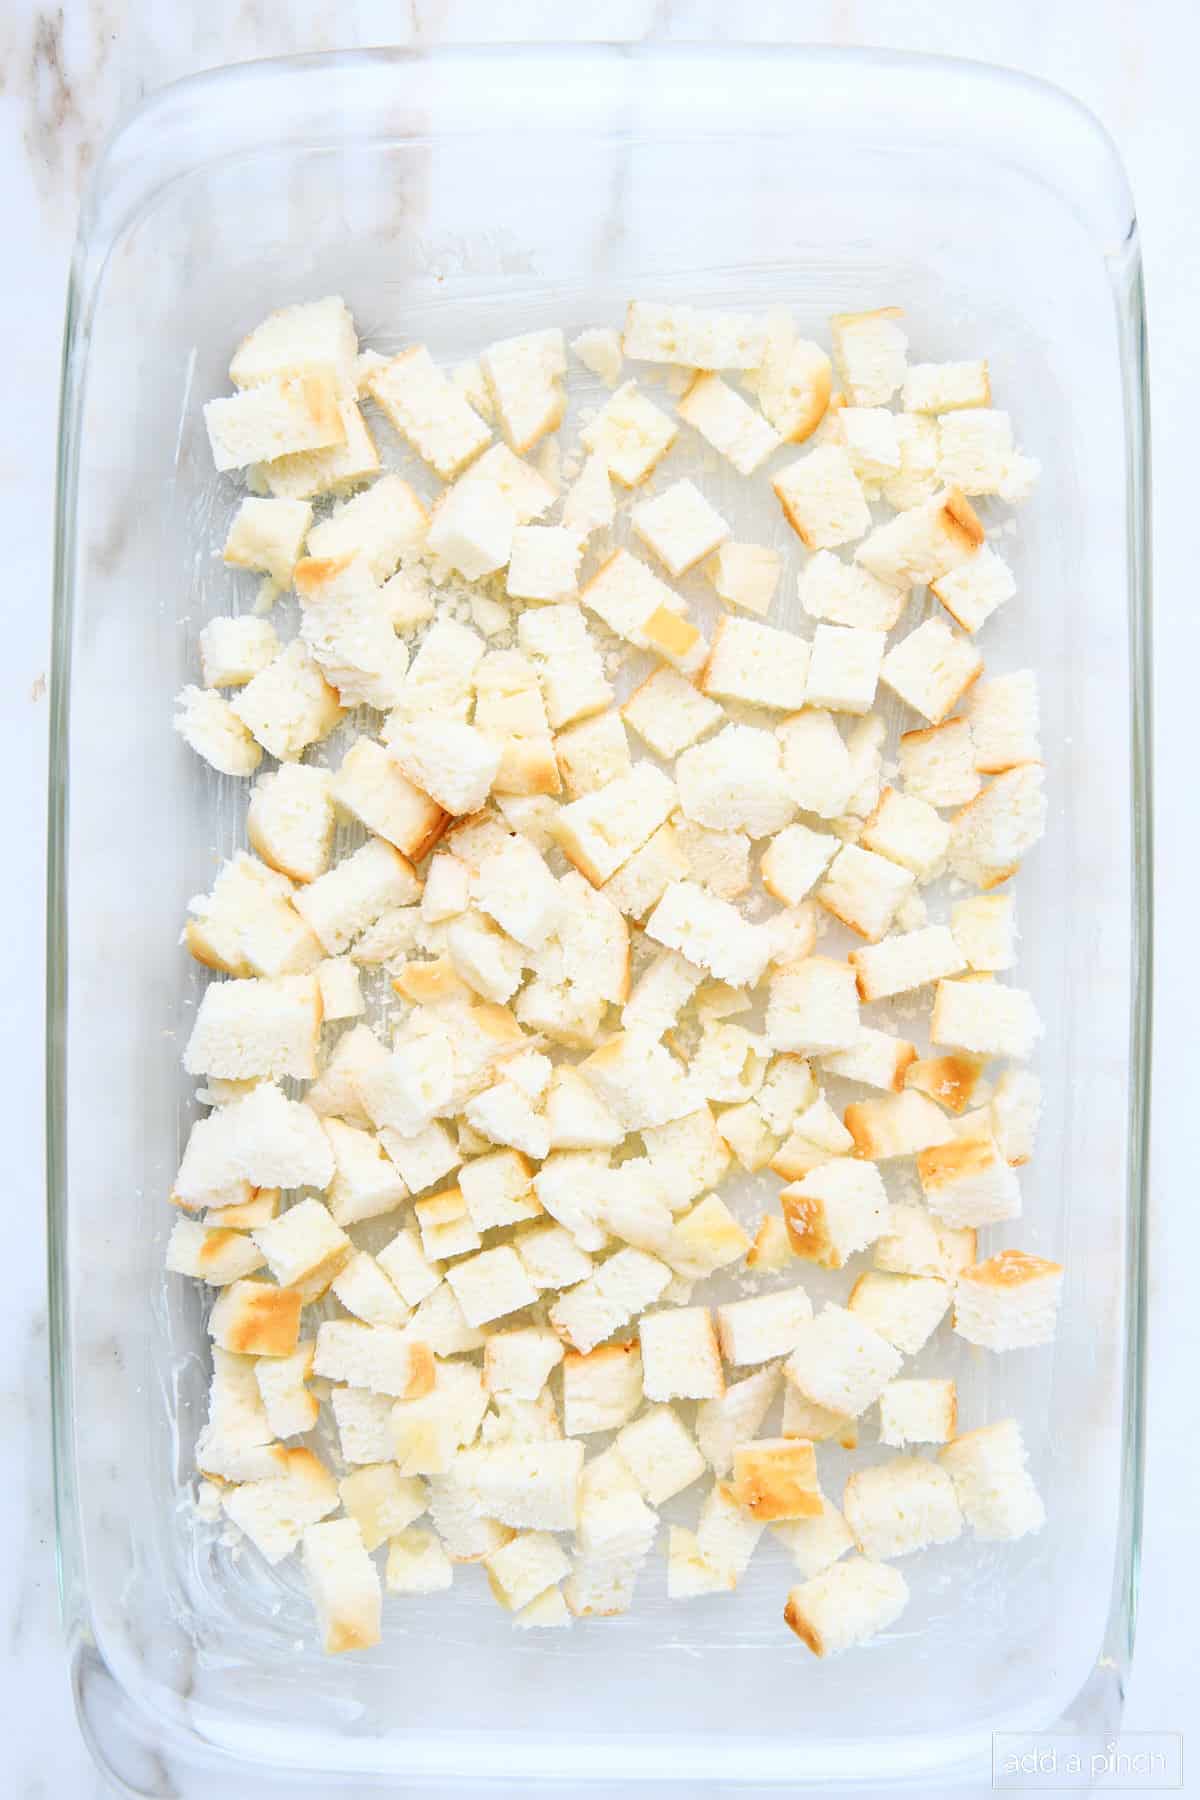 Bread cubes in a 9x13 glass baking dish.